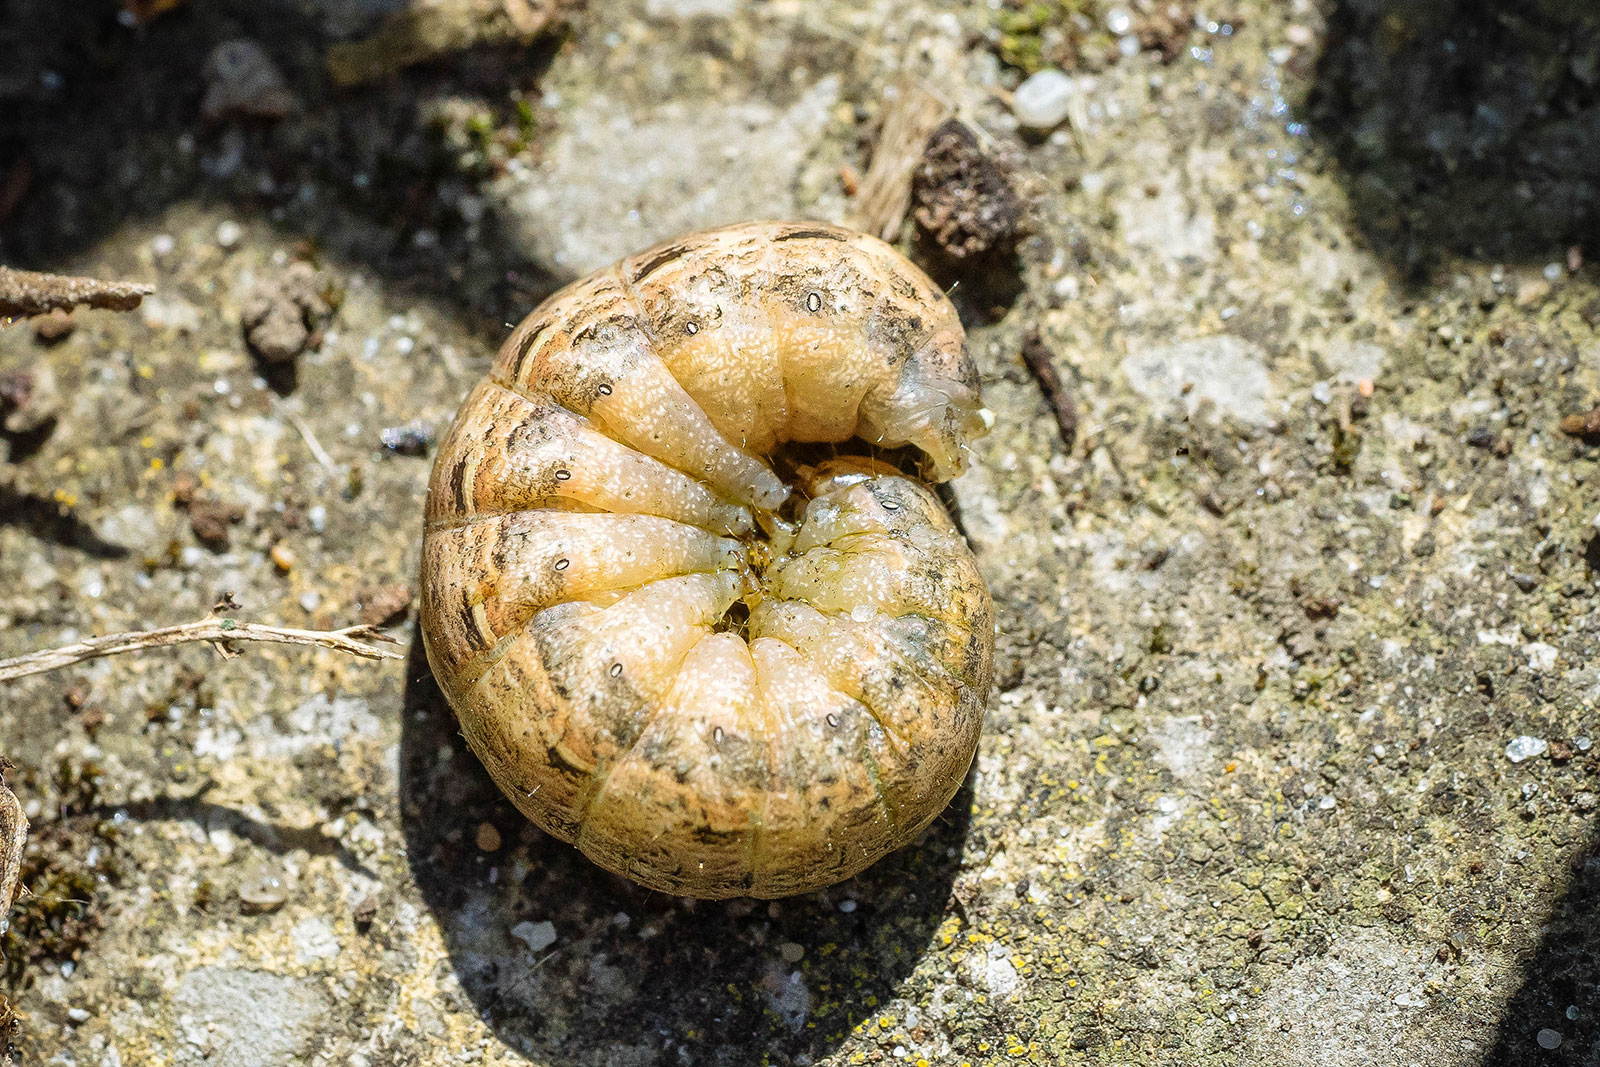 Cutworm on a rock, curled up in a C shape